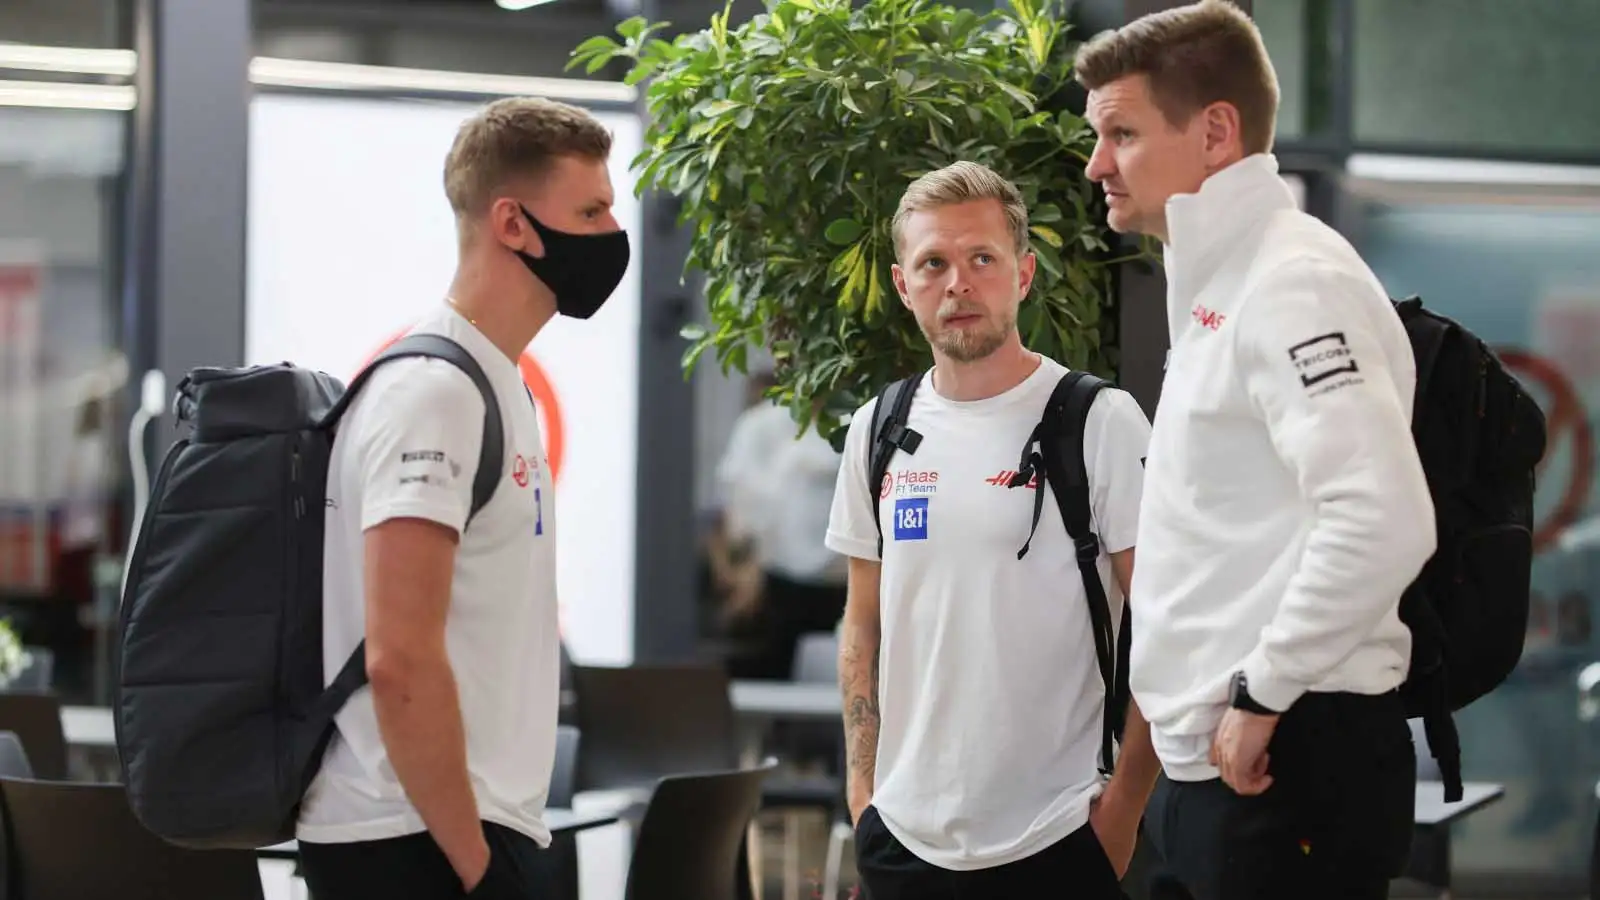 Haas drivers Kevin Magnussen and Mick Schumacher. Jeddah March 2022.